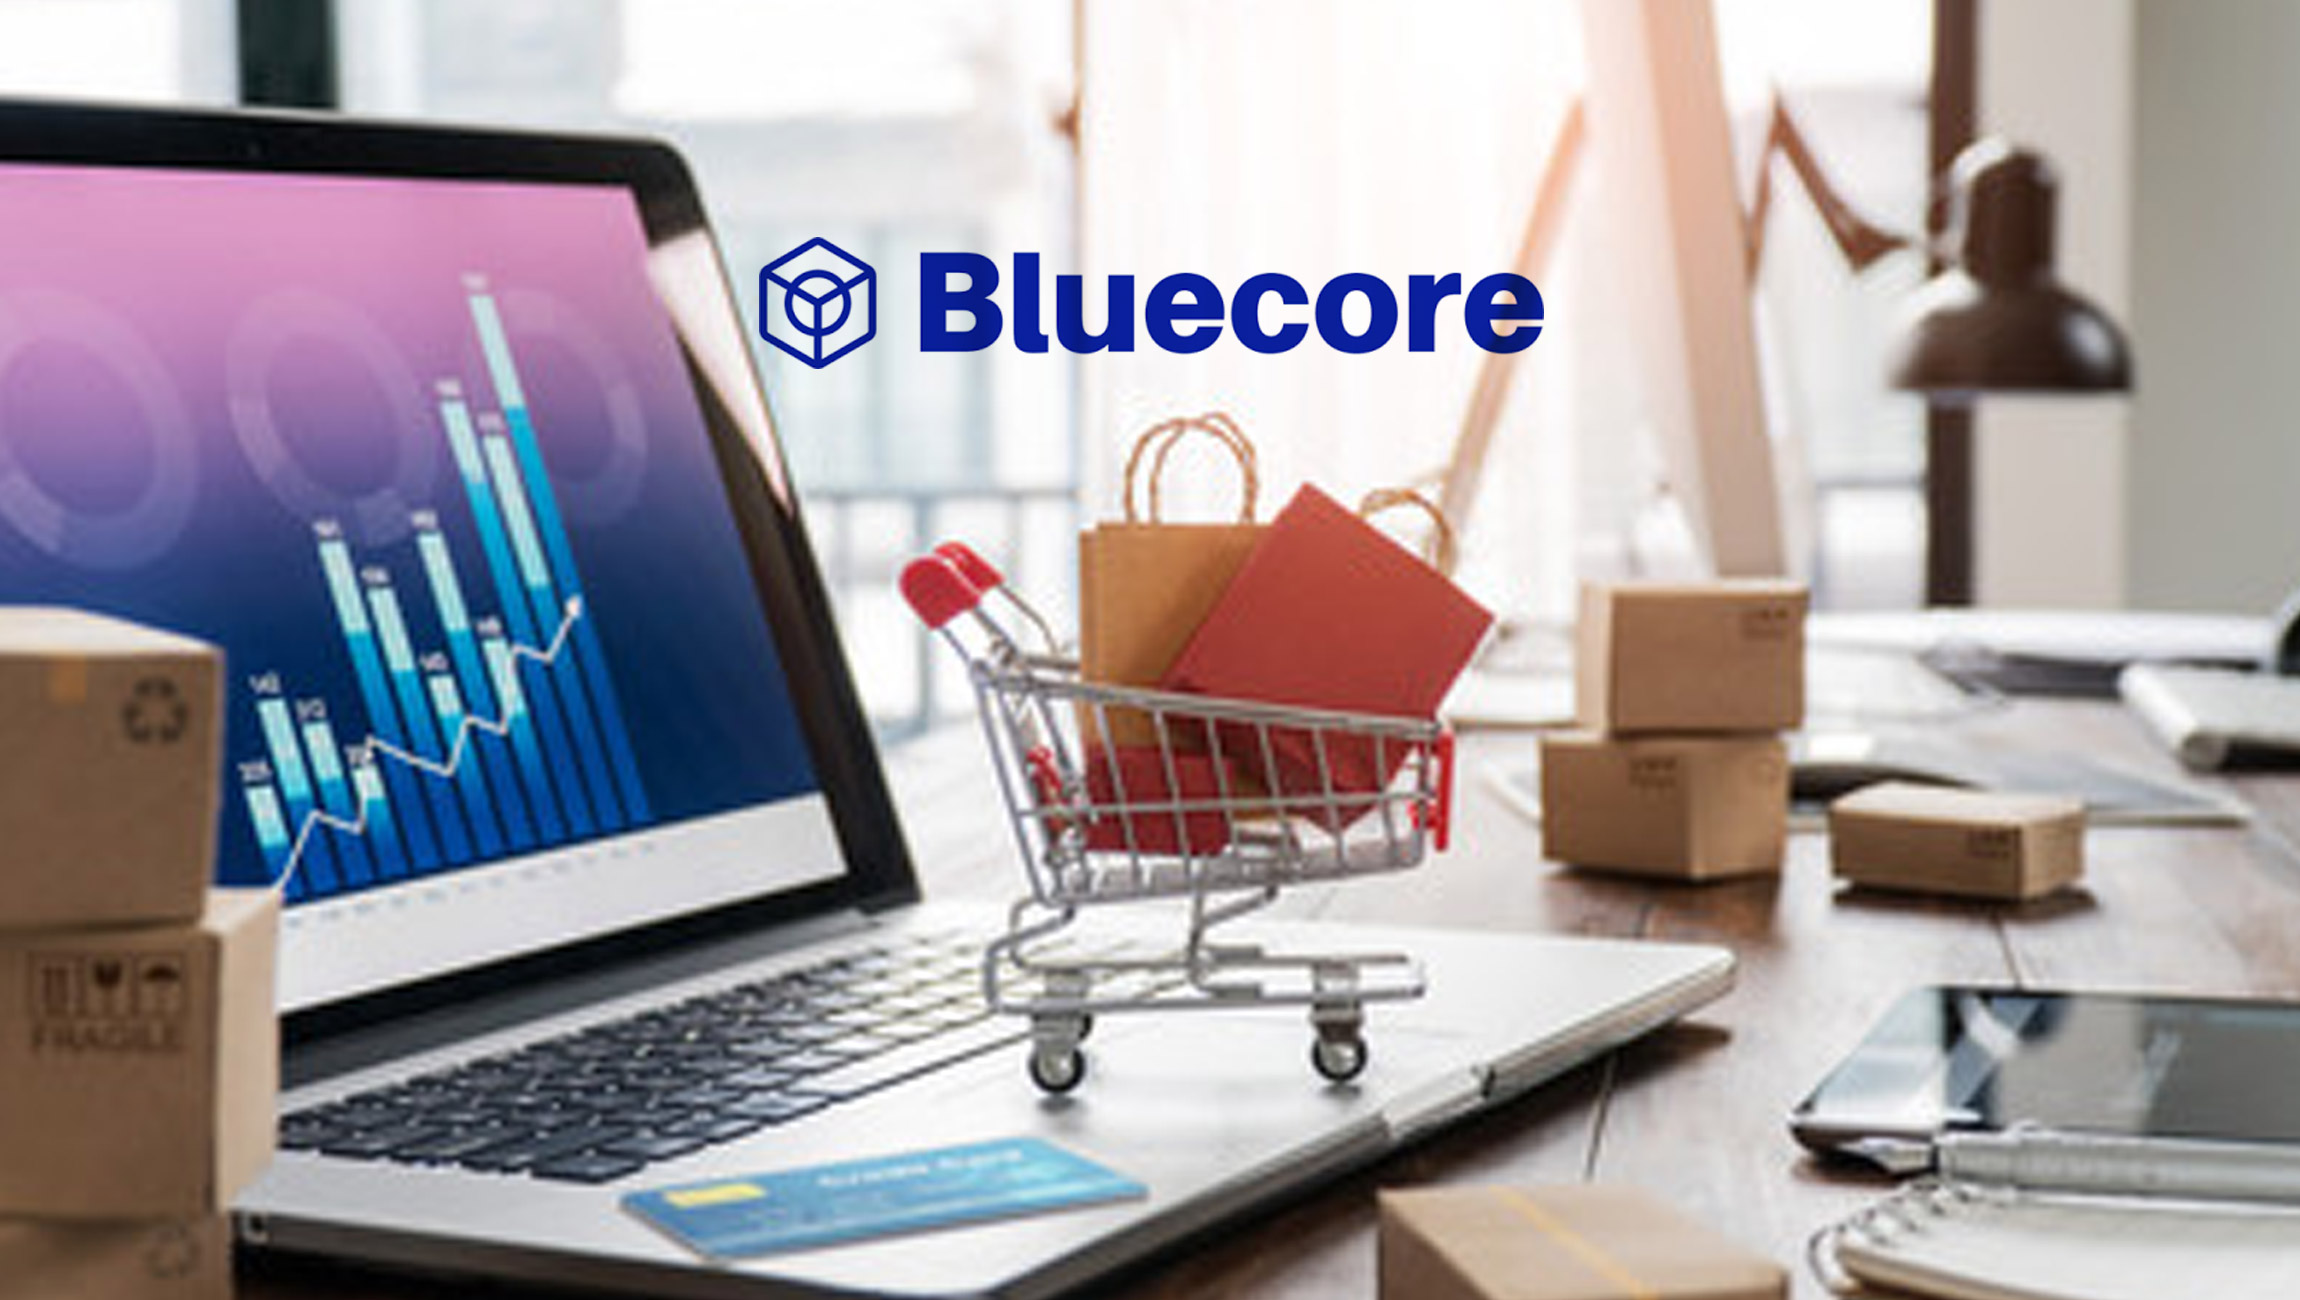 Enterprise Retailers Increase Identification 12% Year-Over-Year This Black Friday Finds Bluecore